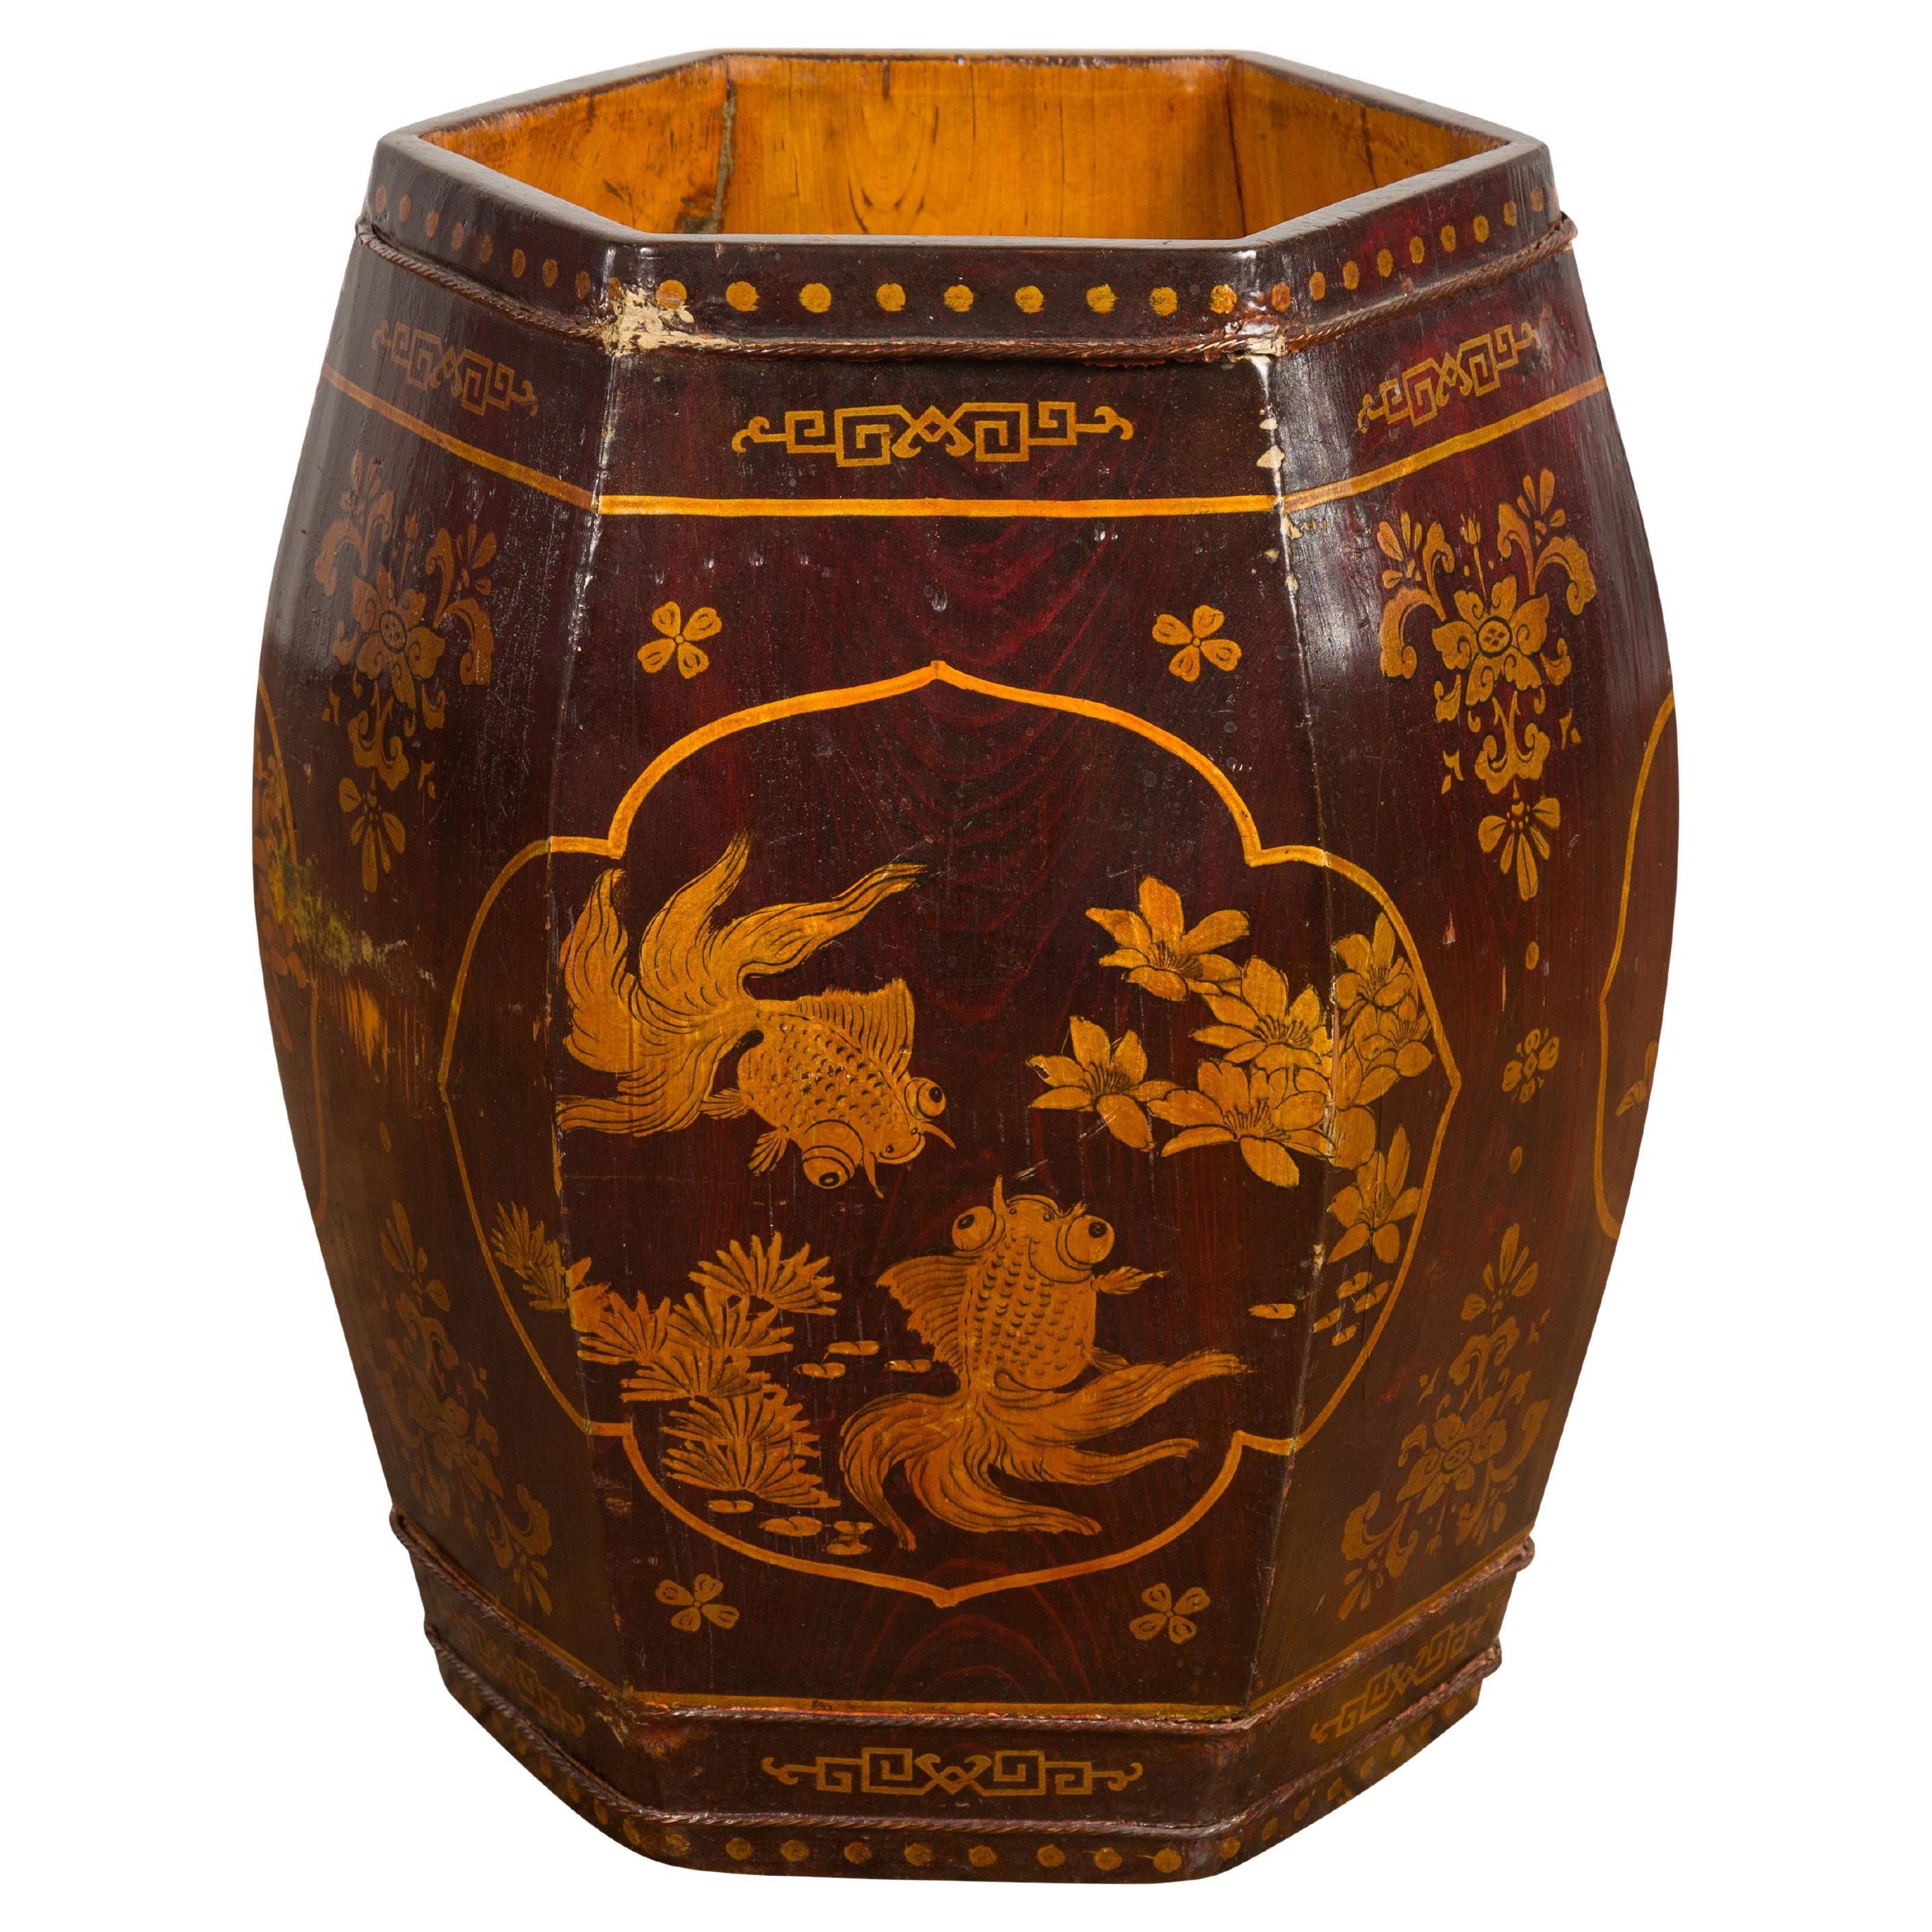 Antique Chinese Wooden Rice Barrel with Fish, Flowers, Deer and Birds Motifs For Sale